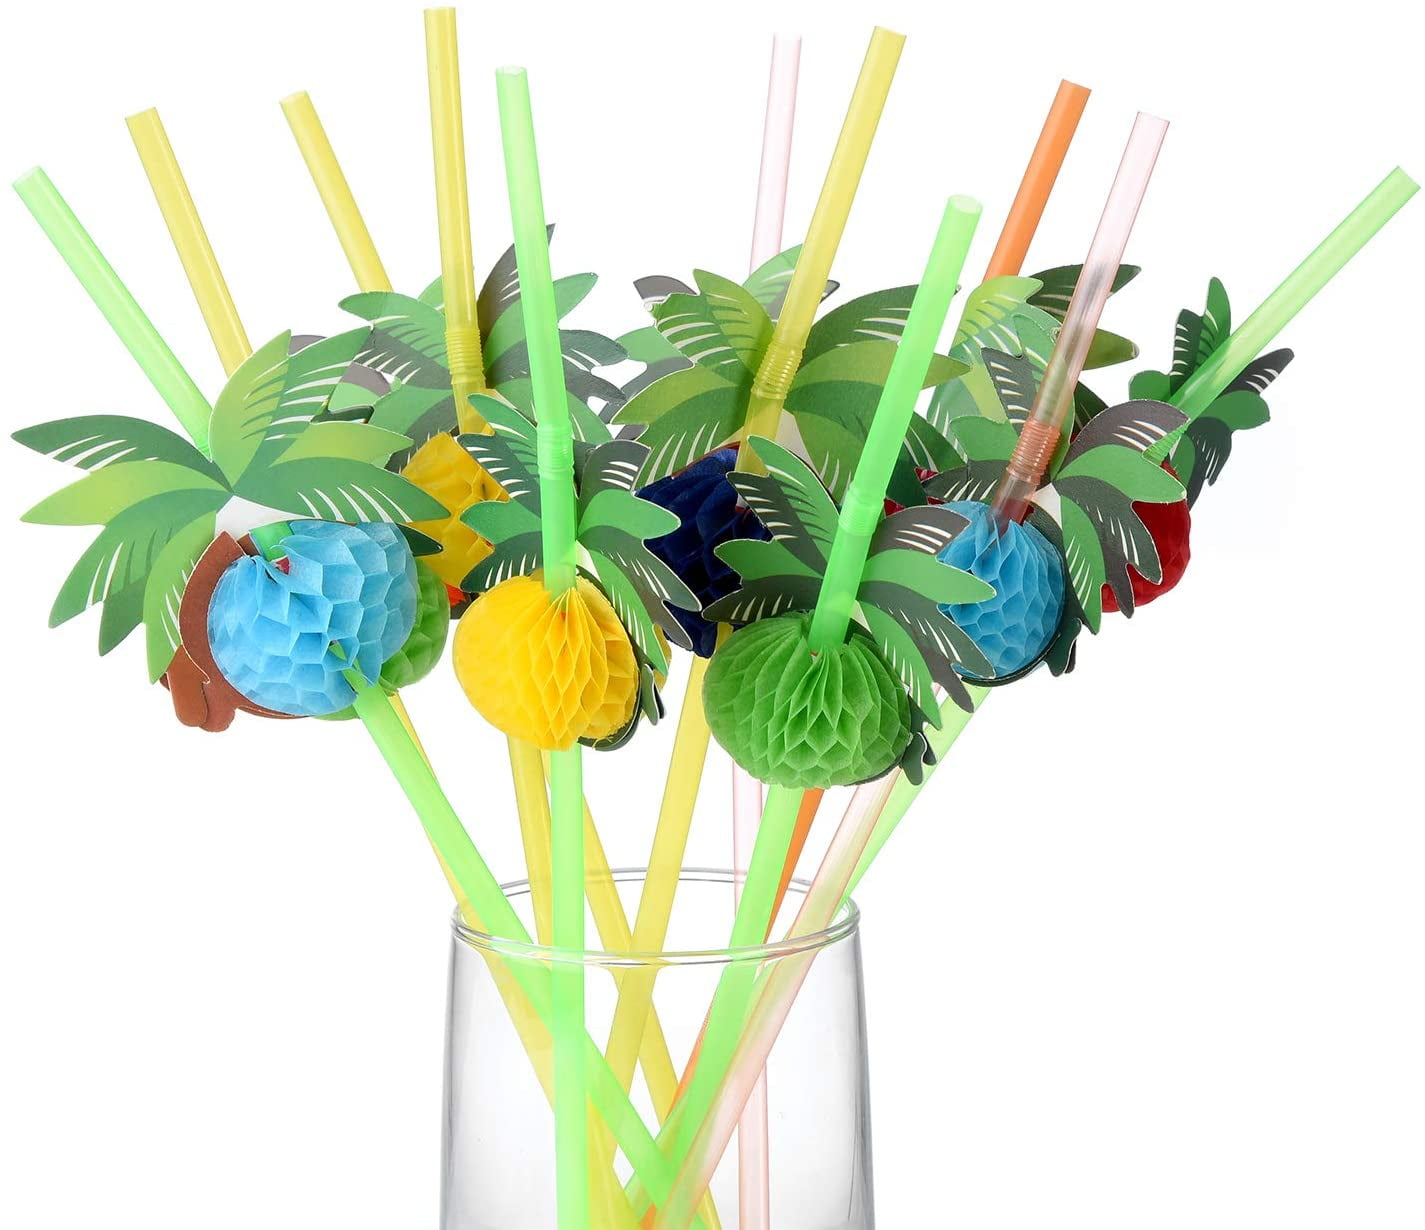 Includes 100 Pieces Palm Tree Picks Mixed Color 200 Pieces Cocktail Decoration Party Set 50 Pieces Cocktail Umbrellas Picks and 50 Pieces 3D Fruit Straws for Hawaiian Tropical Party Decoration